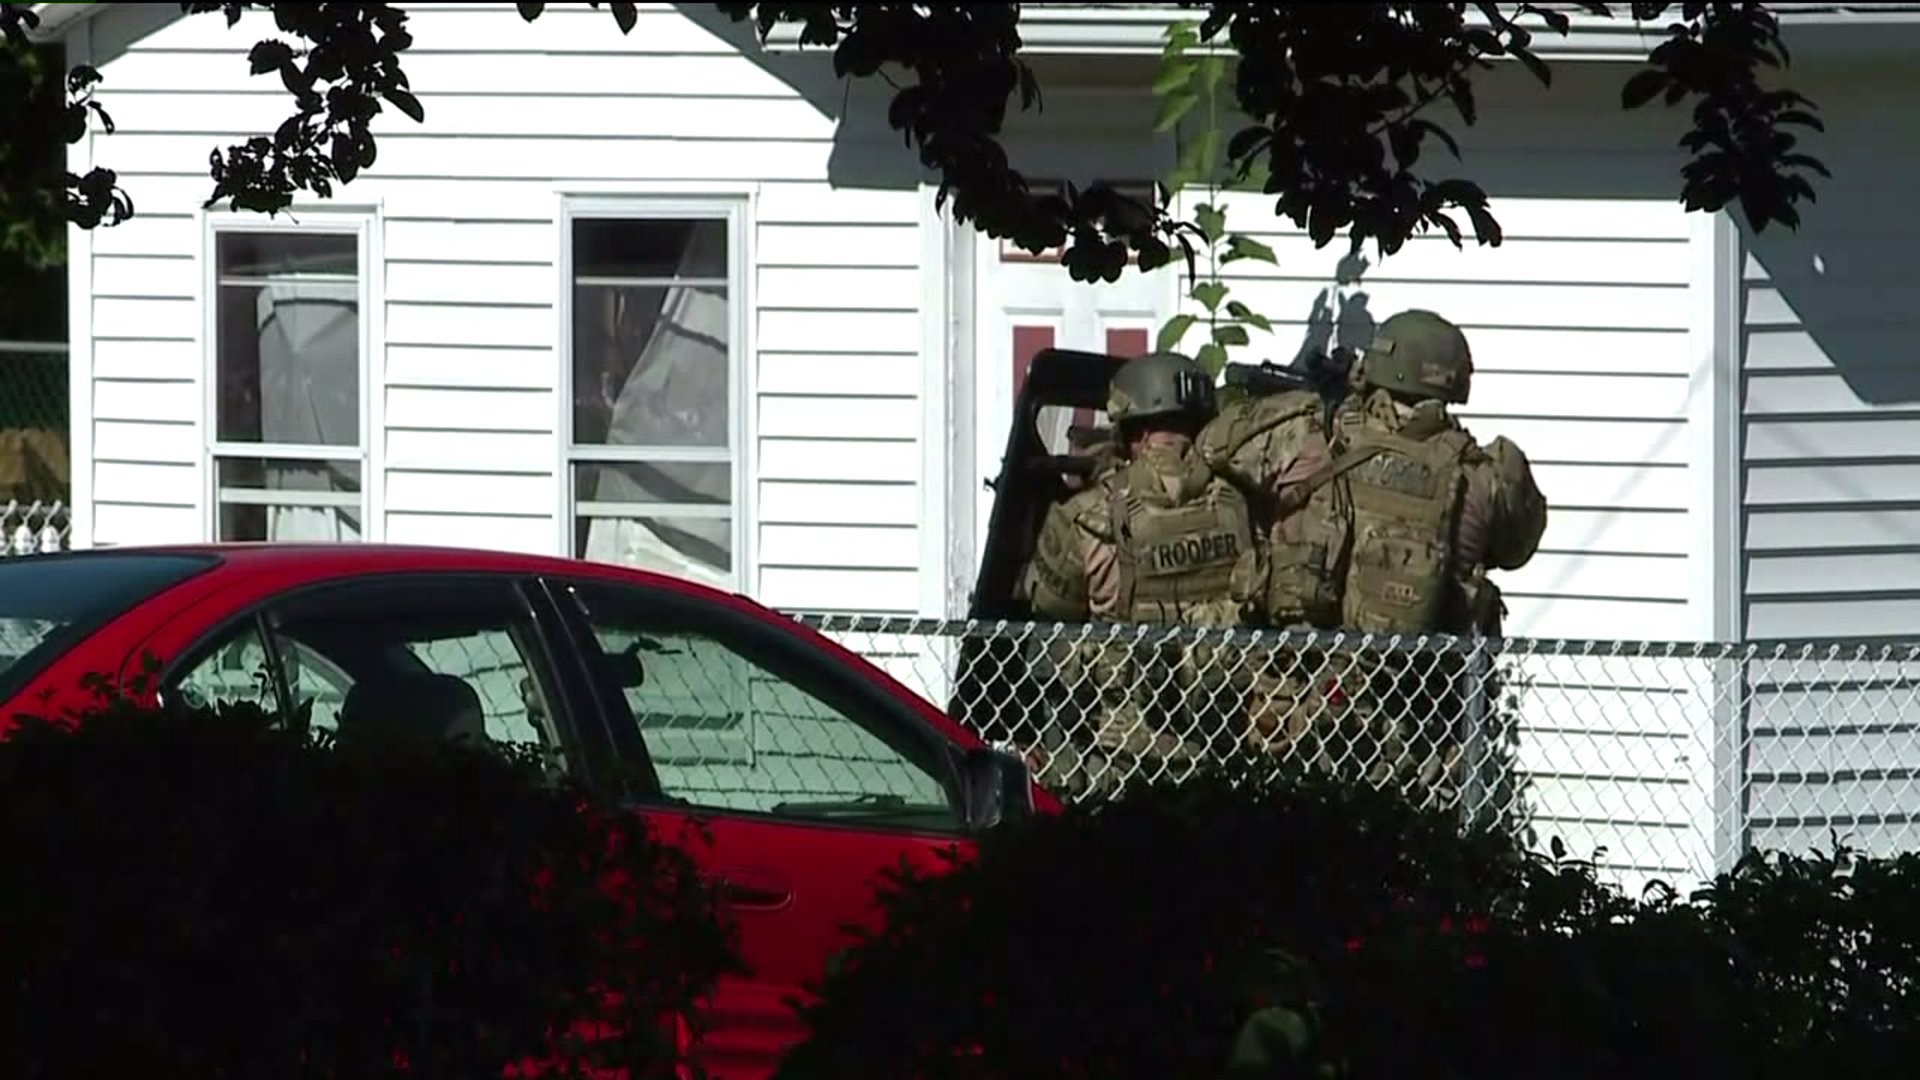 Police Respond to Standoff in Carbon County